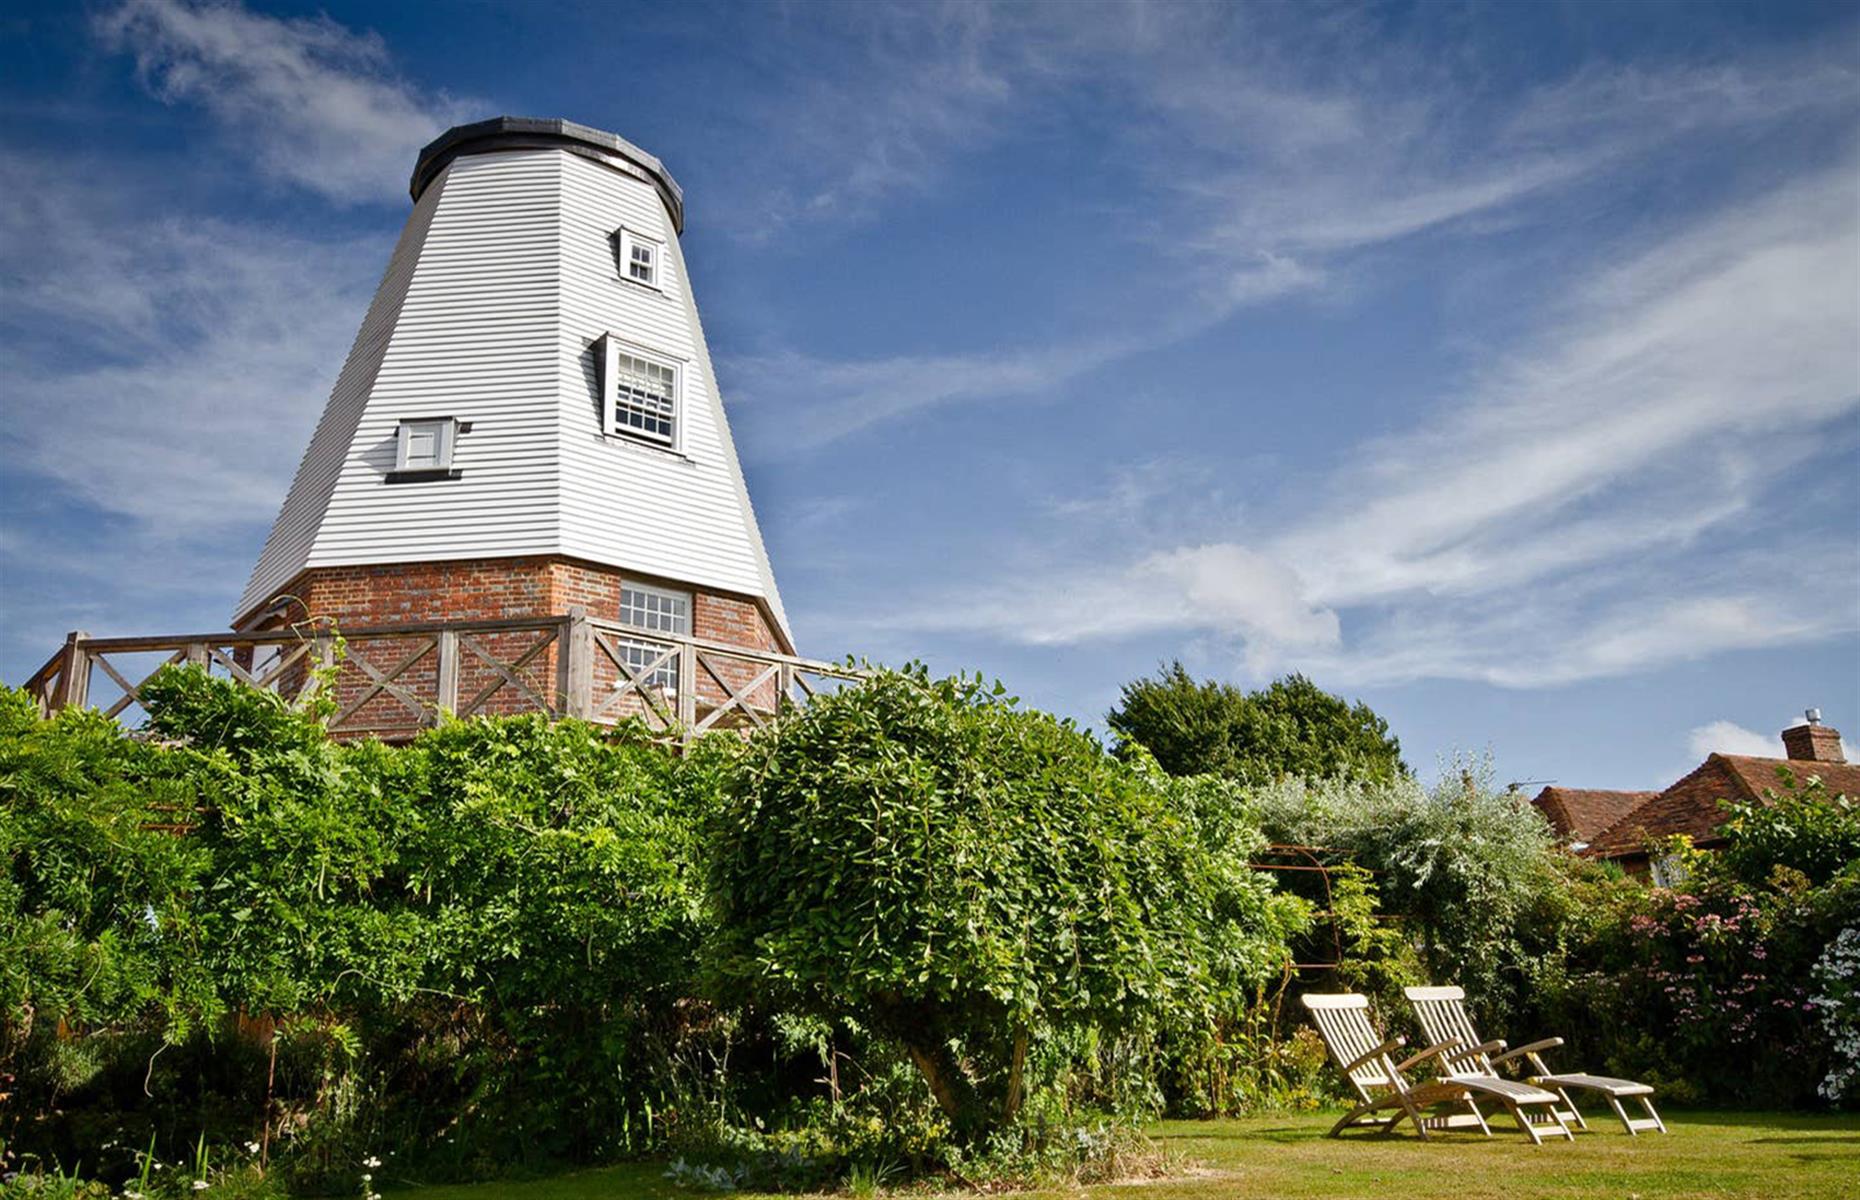 <p>Set in the idyllic Kent countryside in the south of England, <a href="https://www.airbnb.co.uk/rooms/1237965">this old windmill</a> has been beautifully restored. There's one bedroom with a king-sized bed, a fully-equipped kitchen and a cozy living room with a gas wood-burning stove. It's easy to give into the charm of the area and enjoy relaxing rambles before stopping at one of the charming country pubs for a meal. Due to its remote location, the sunrises and sunsets here are stunning.</p>